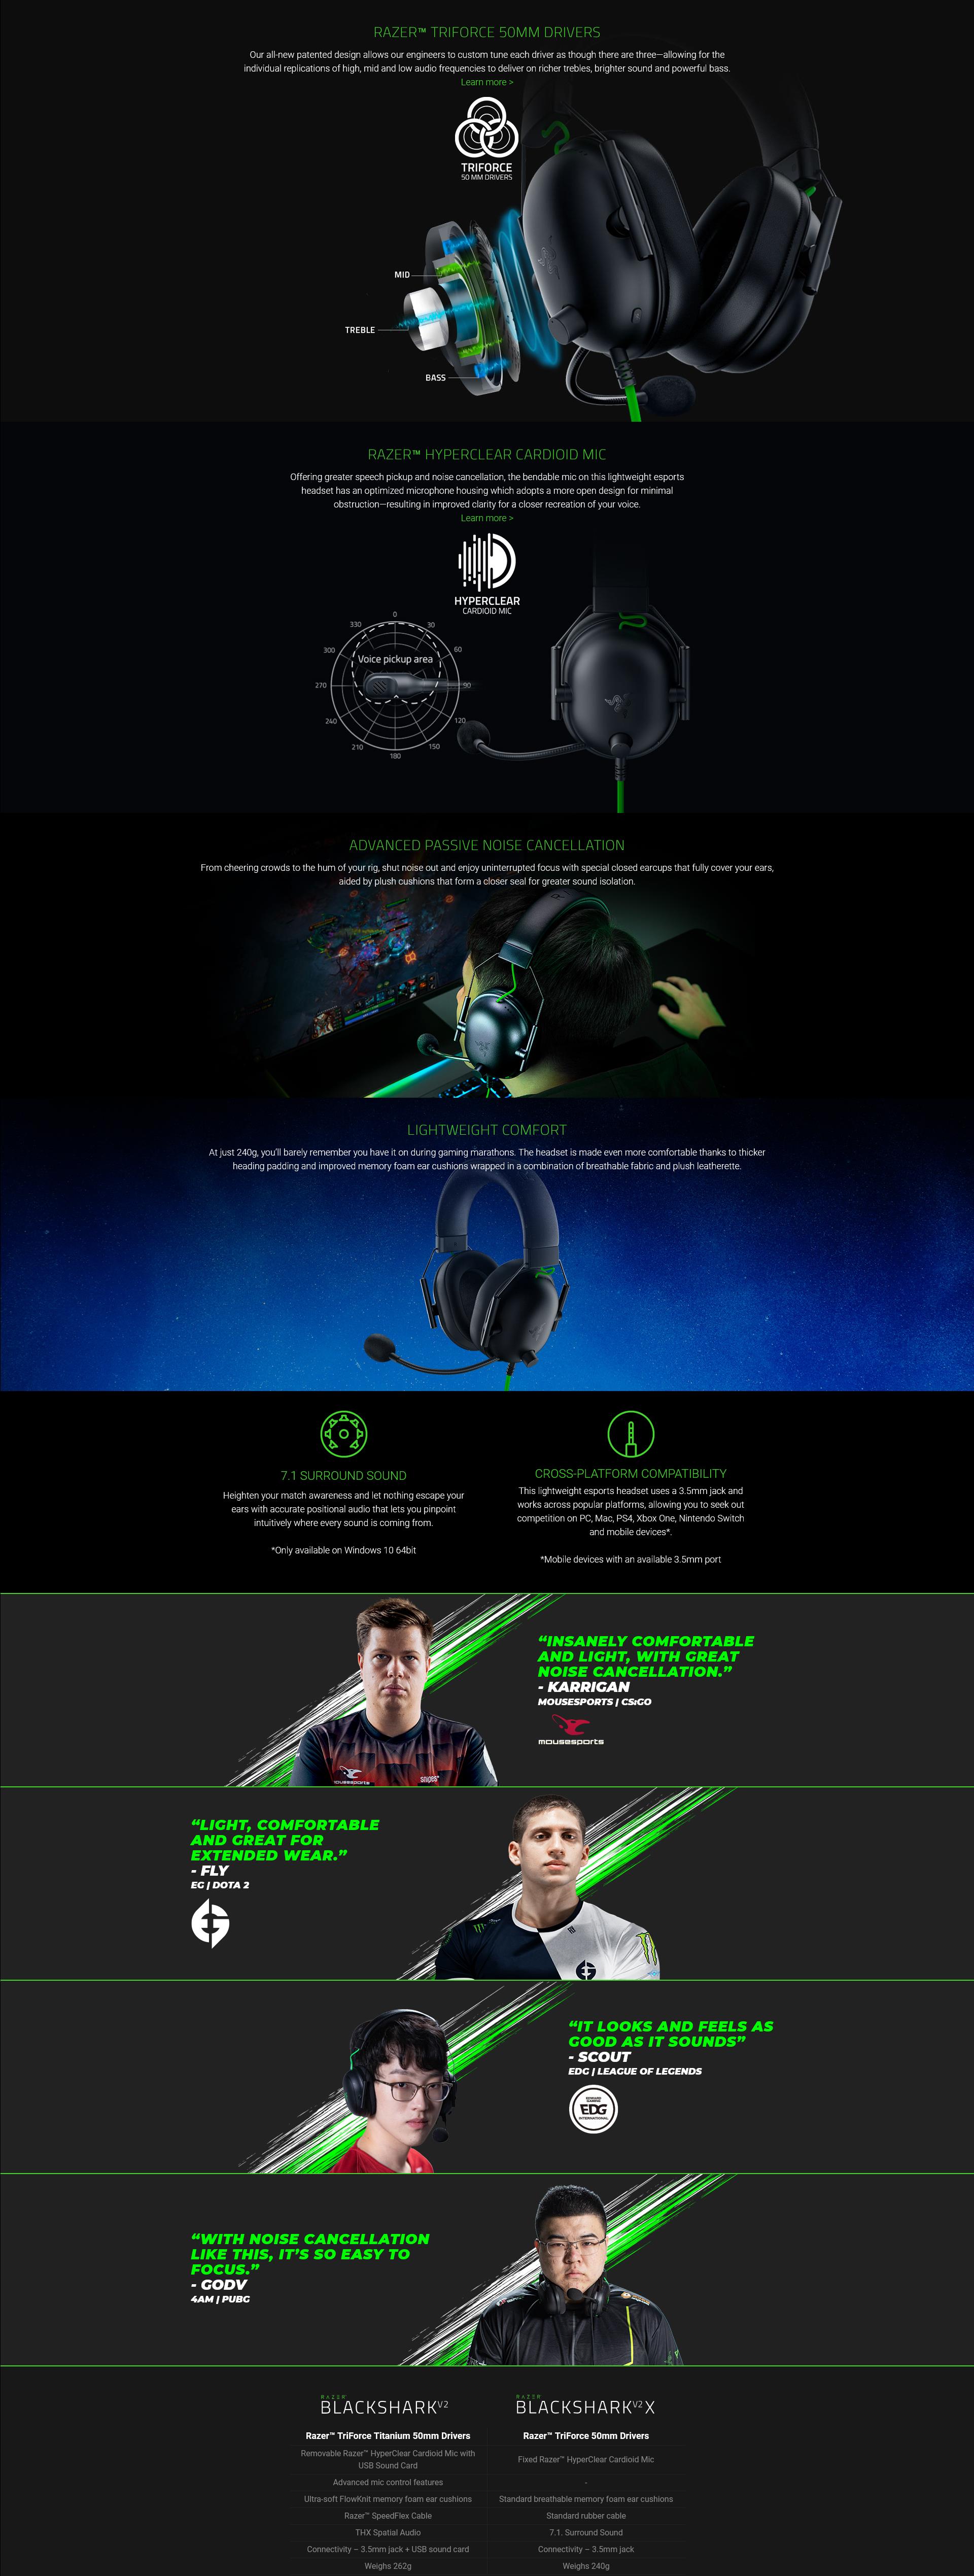 A large marketing image providing additional information about the product Razer BlackShark V2 X - Wired Gaming Headset (Quartz Pink) - Additional alt info not provided